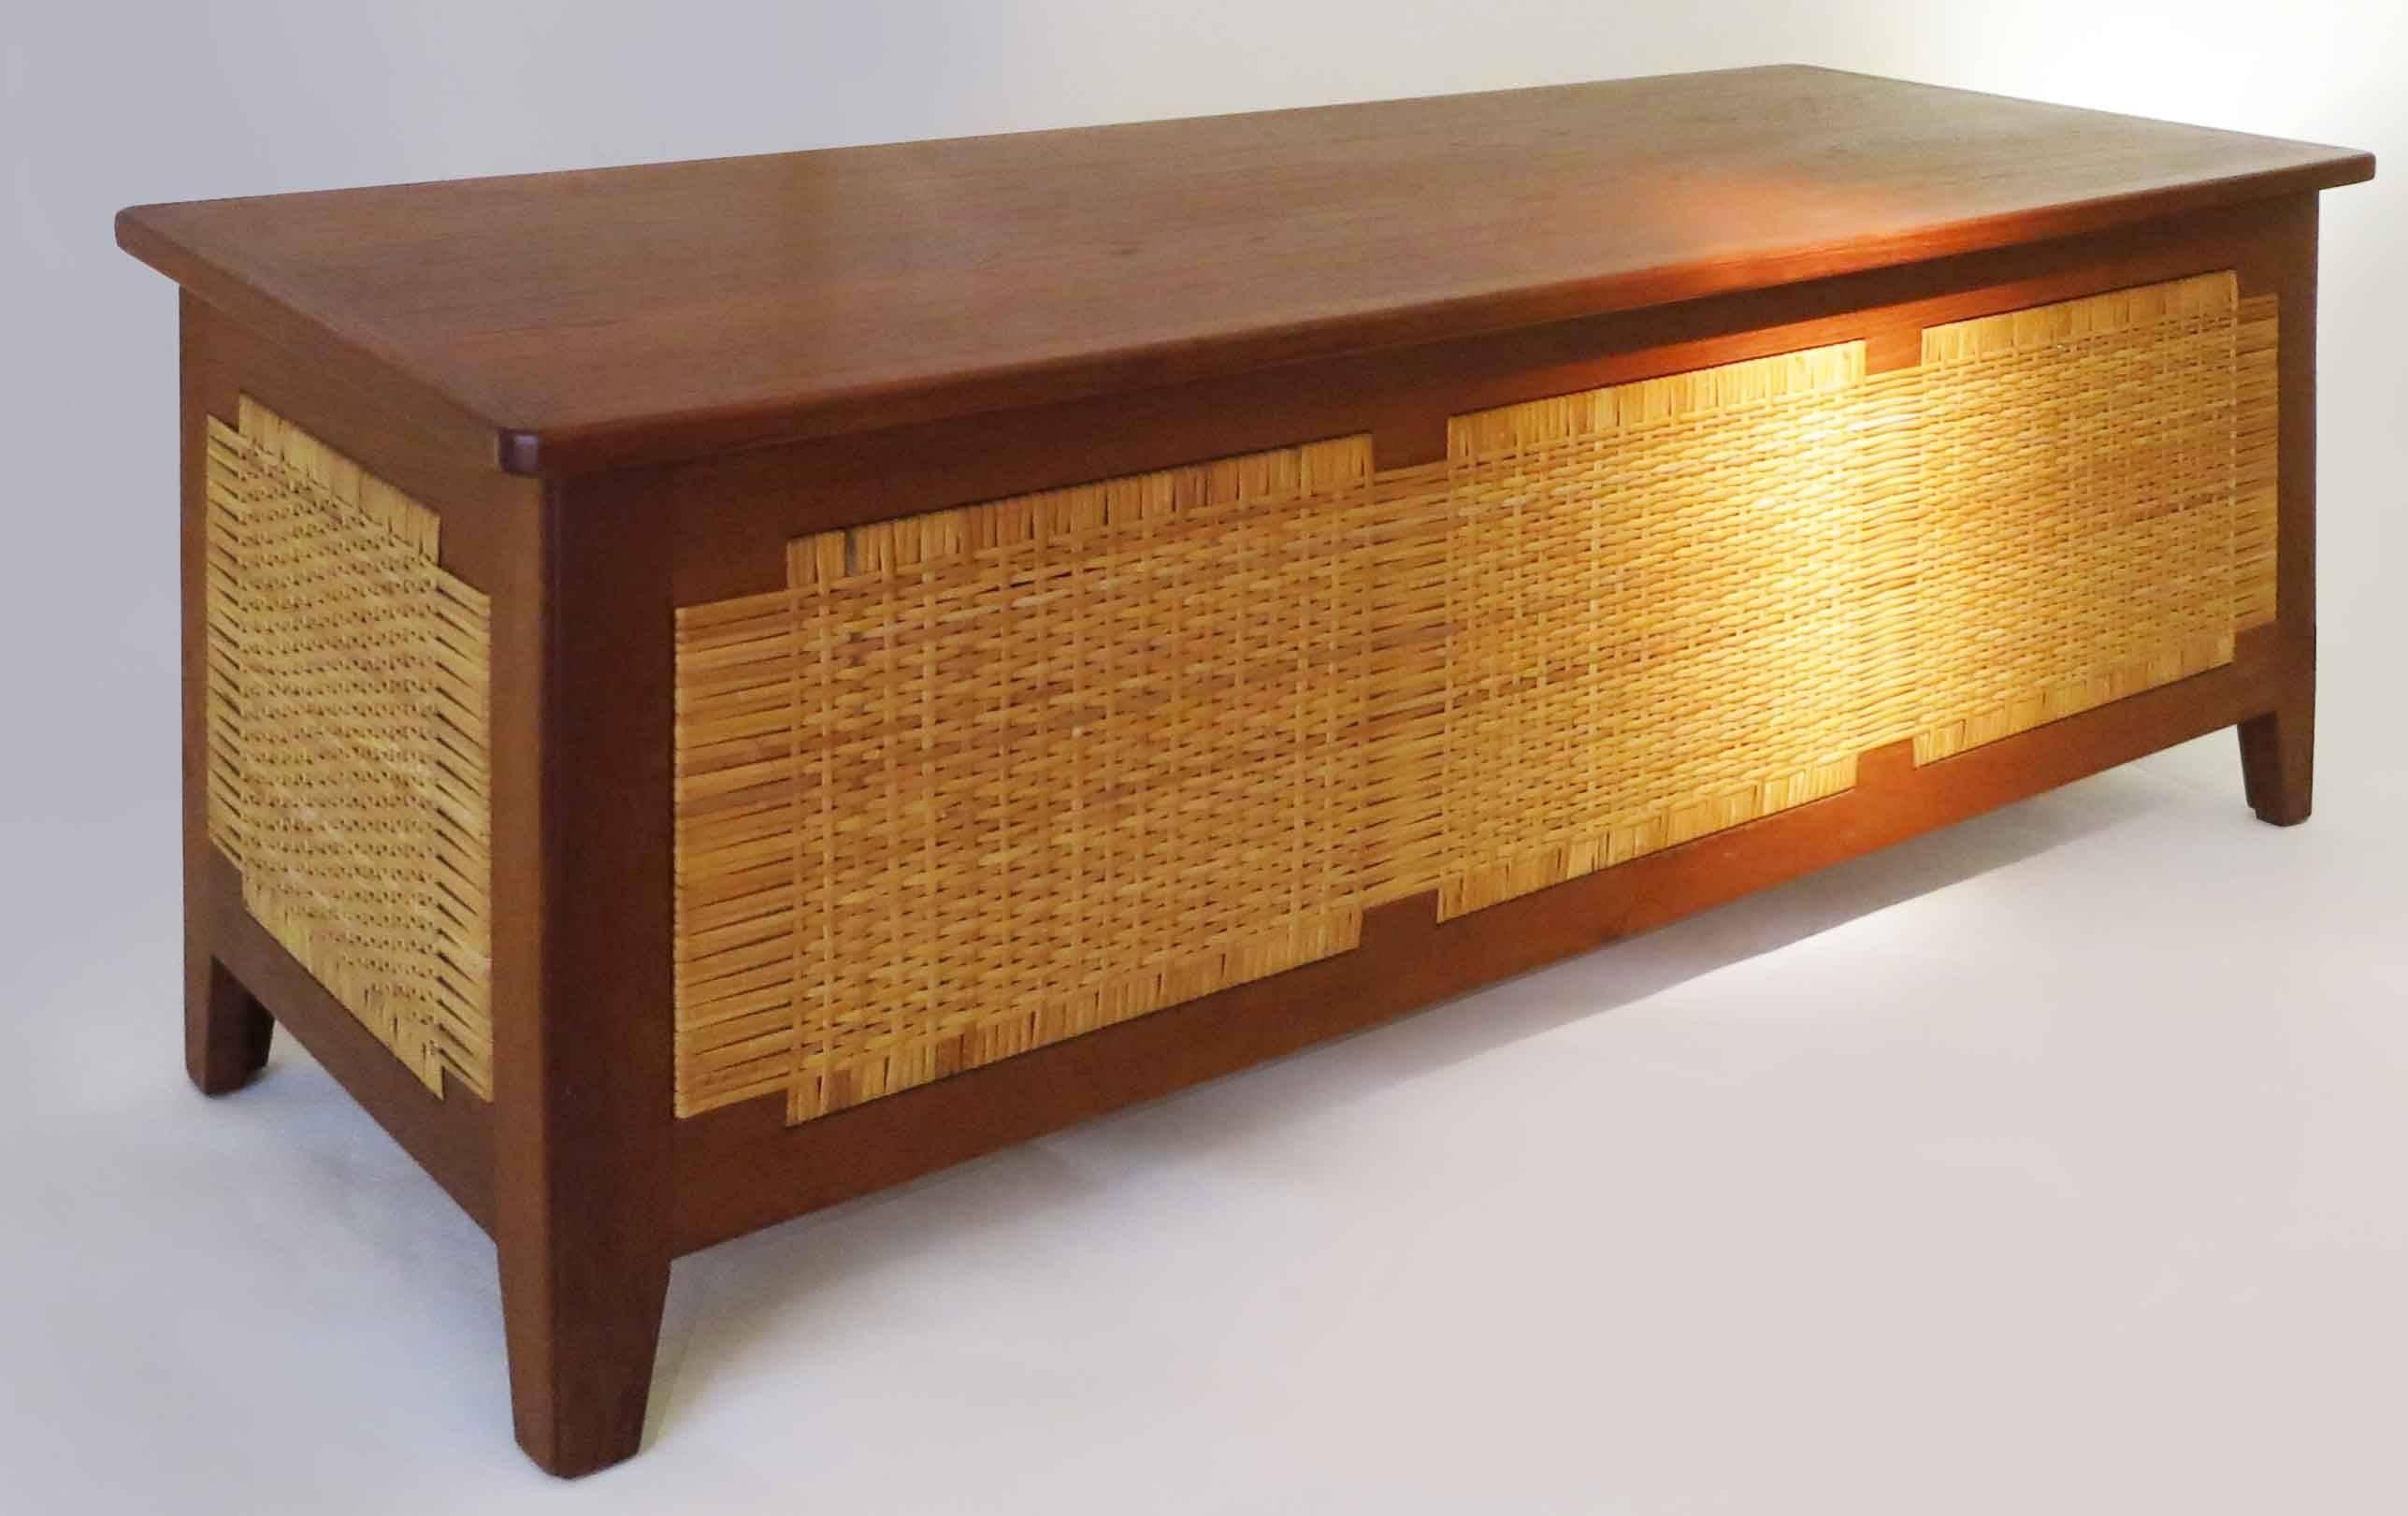 Long chest bench by Kaj Winding, Denmark, 1960s
Solid teak with cane panels on four sides.
Opening top.